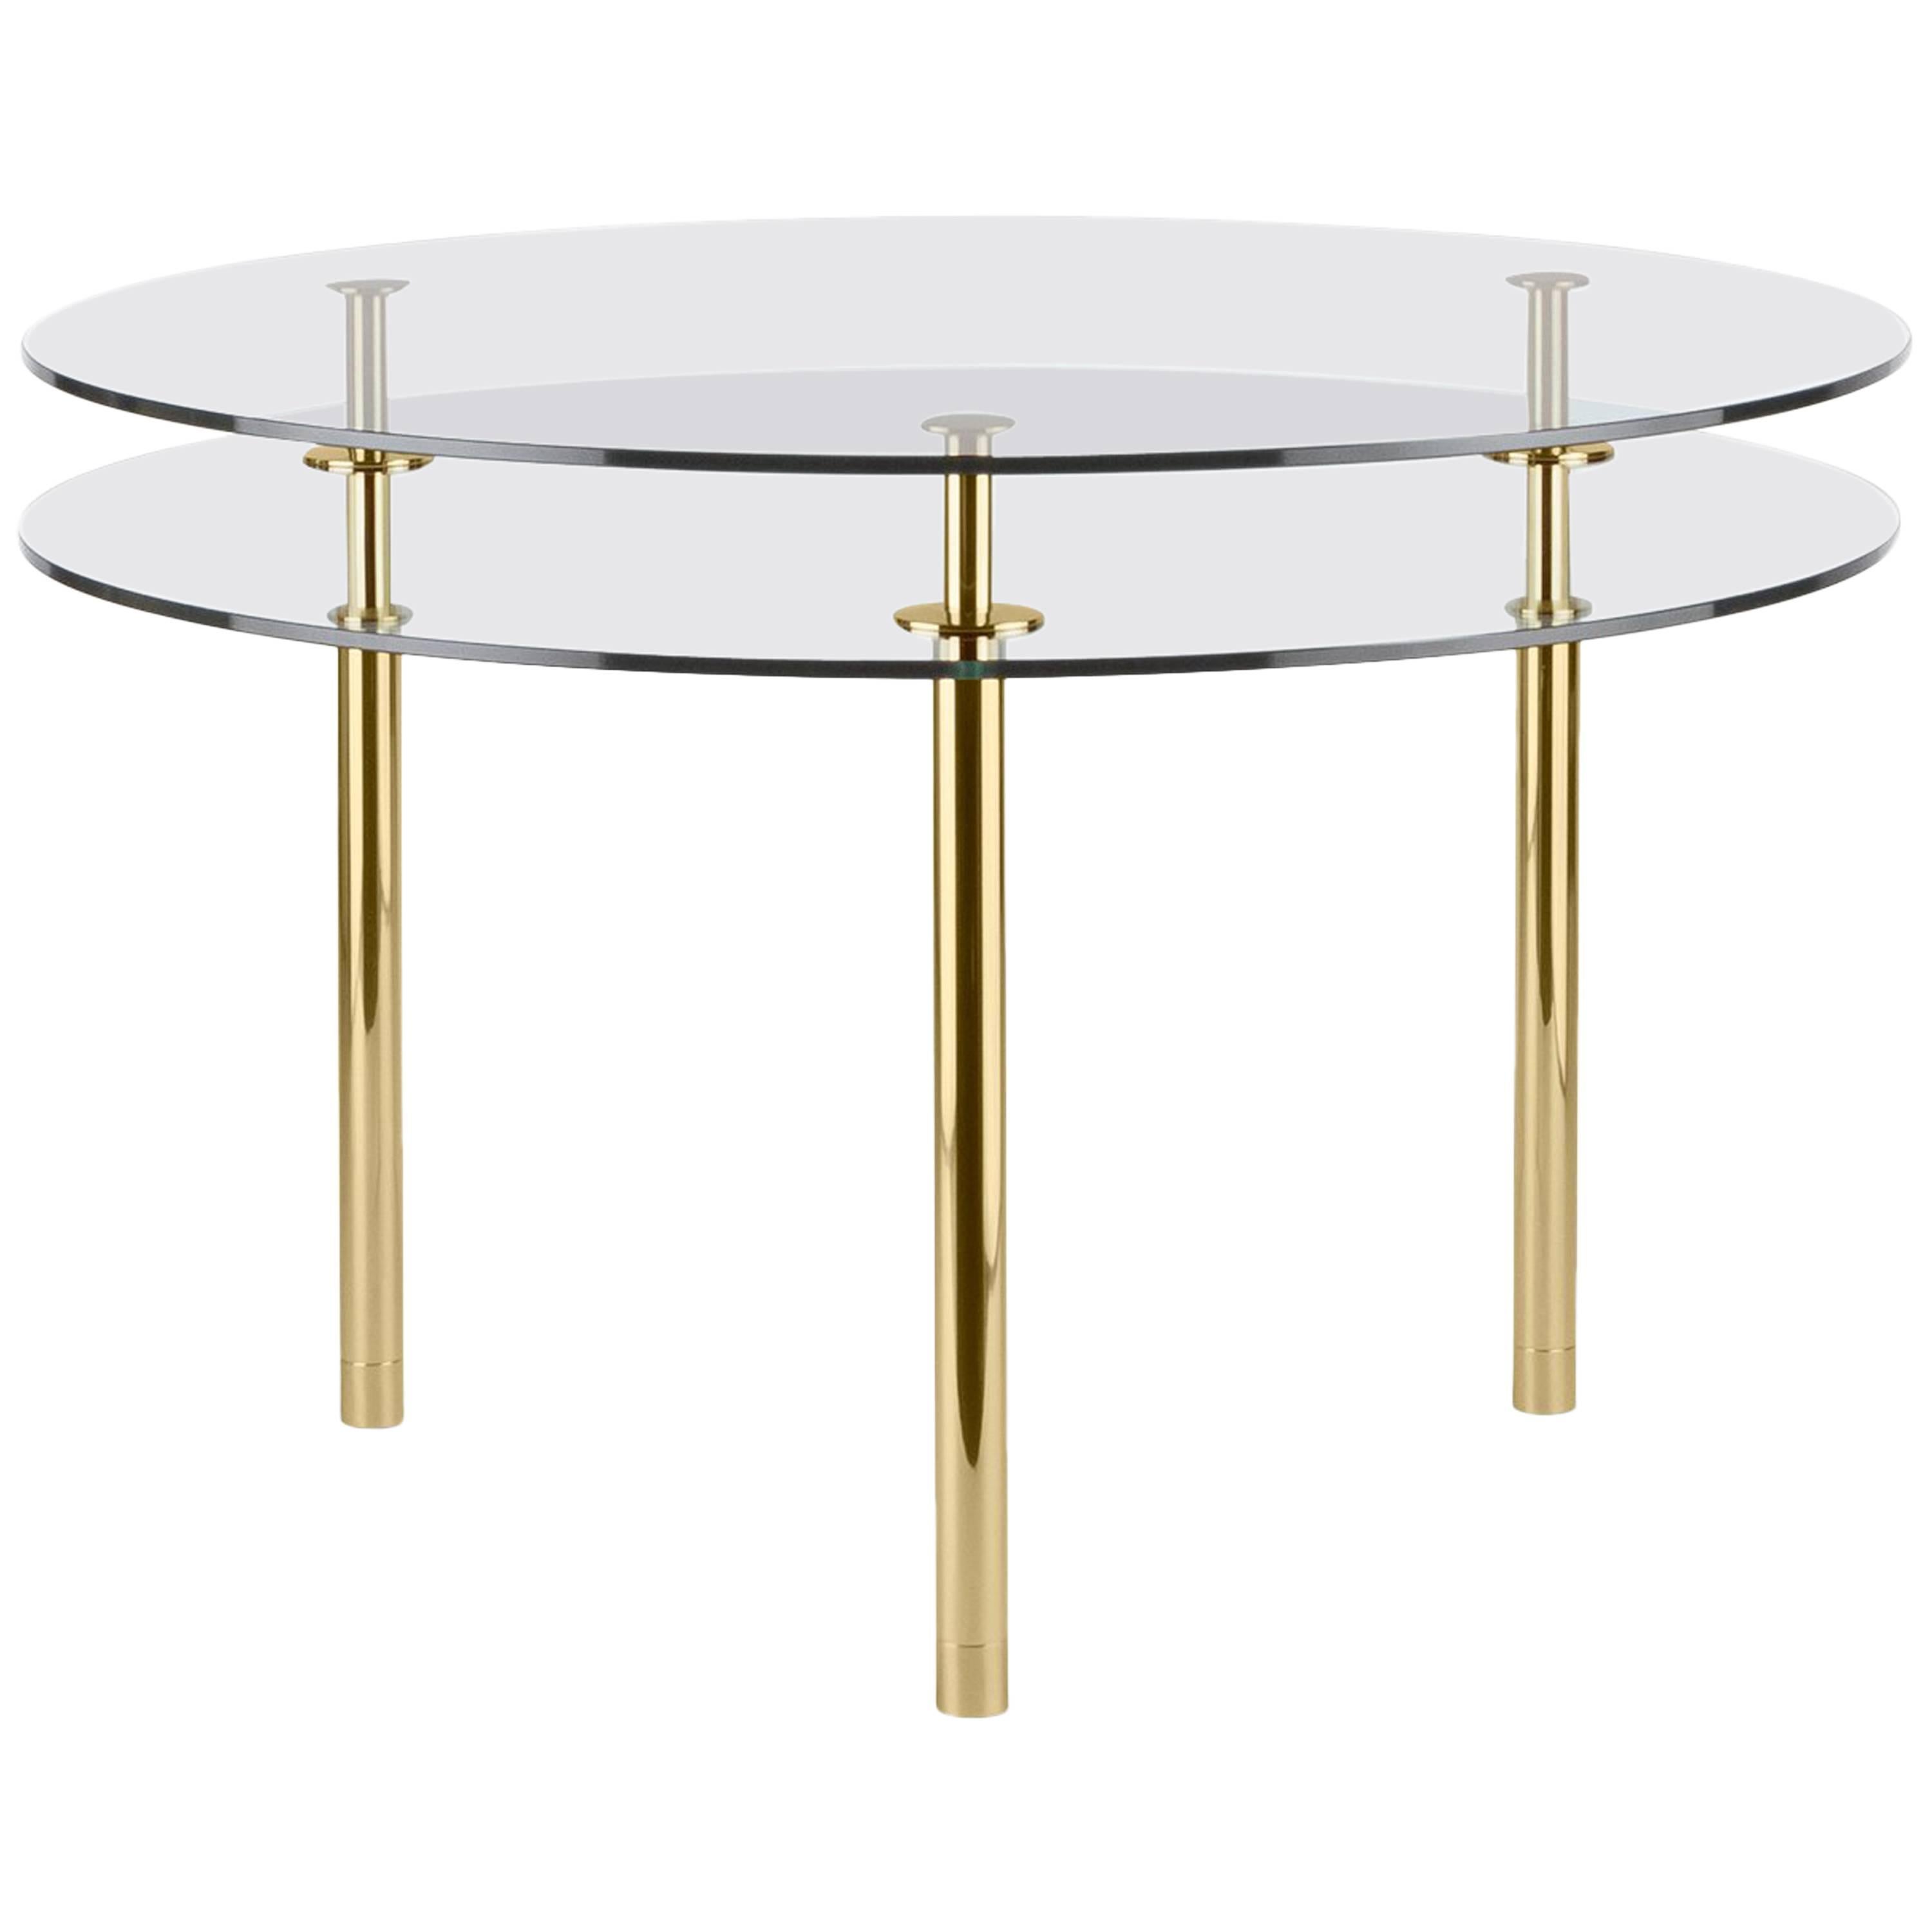 Ghidini 1961 Legs Medium Round Table in Crystal and Polished Brass For Sale